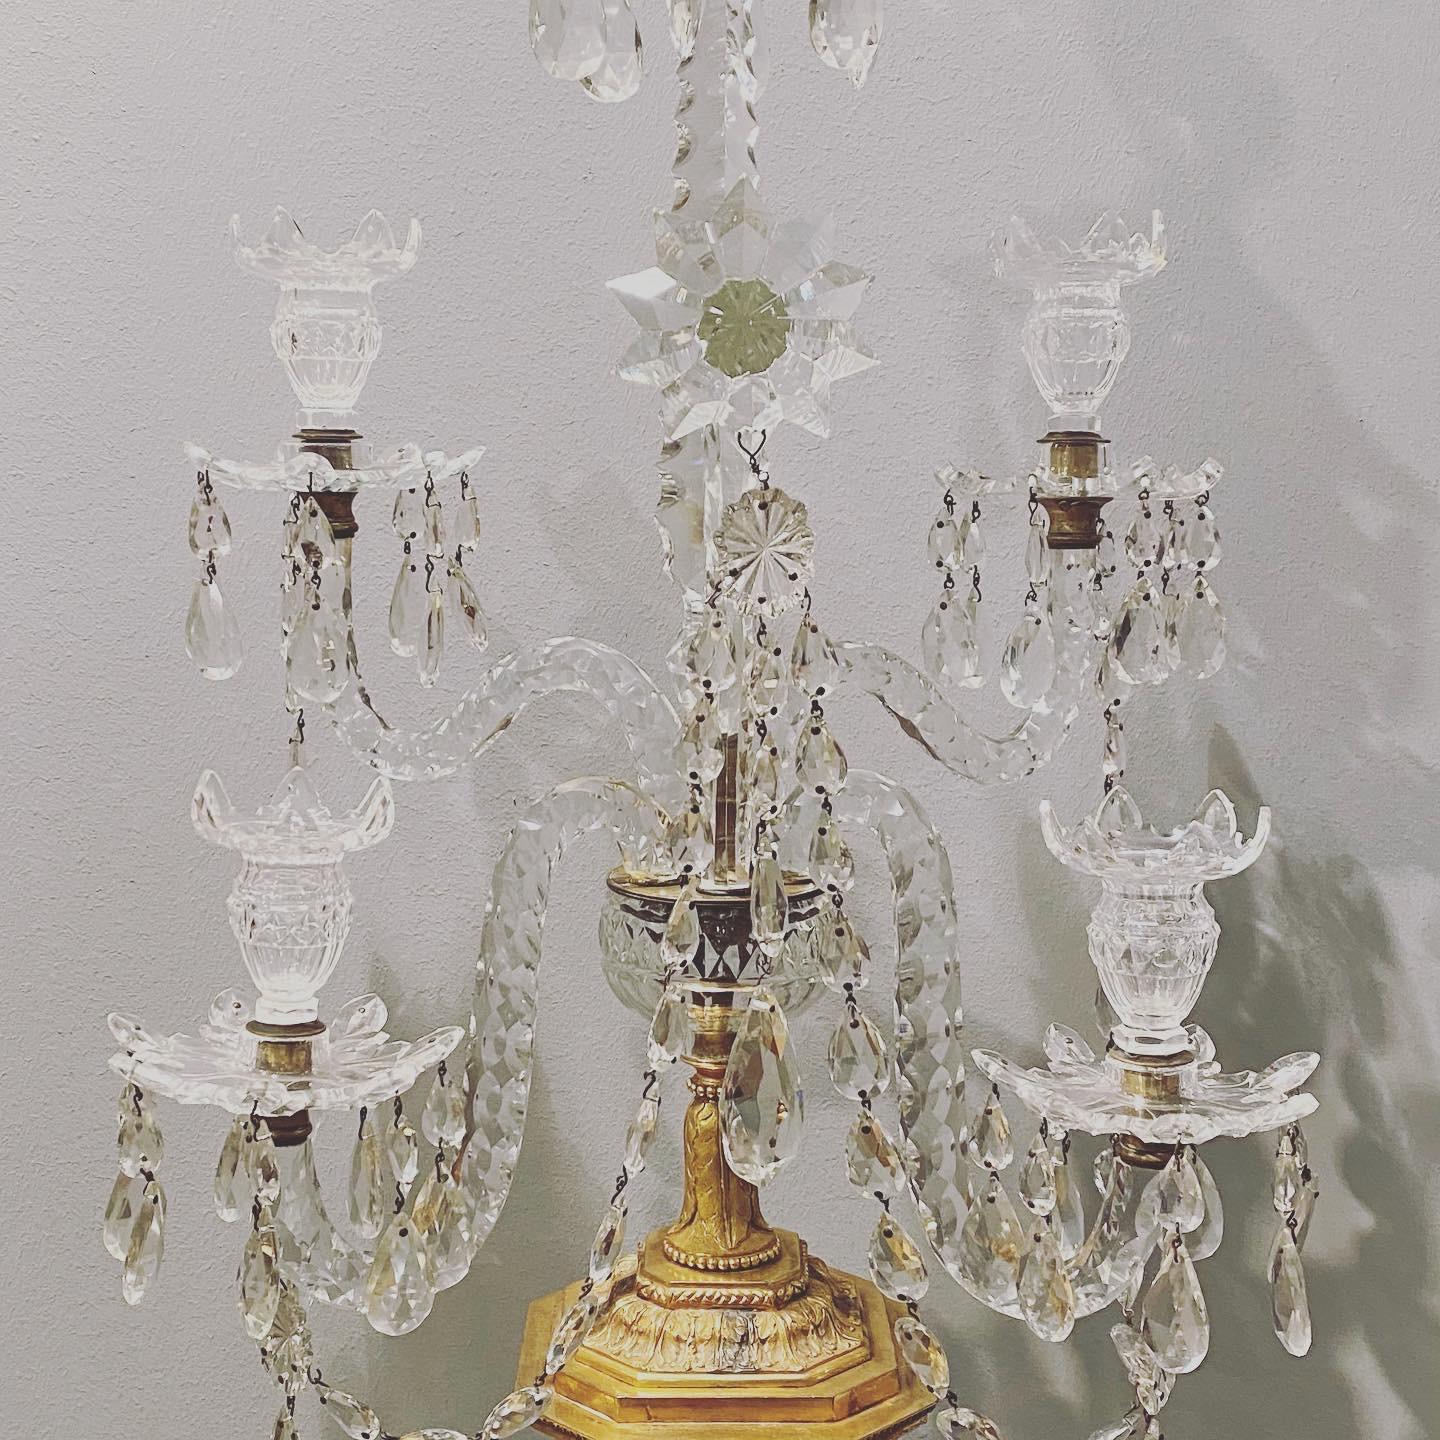 Louis XVI Pair of Important Gilt Bronze Candelabra with Cut Crystal Arms, 1780s